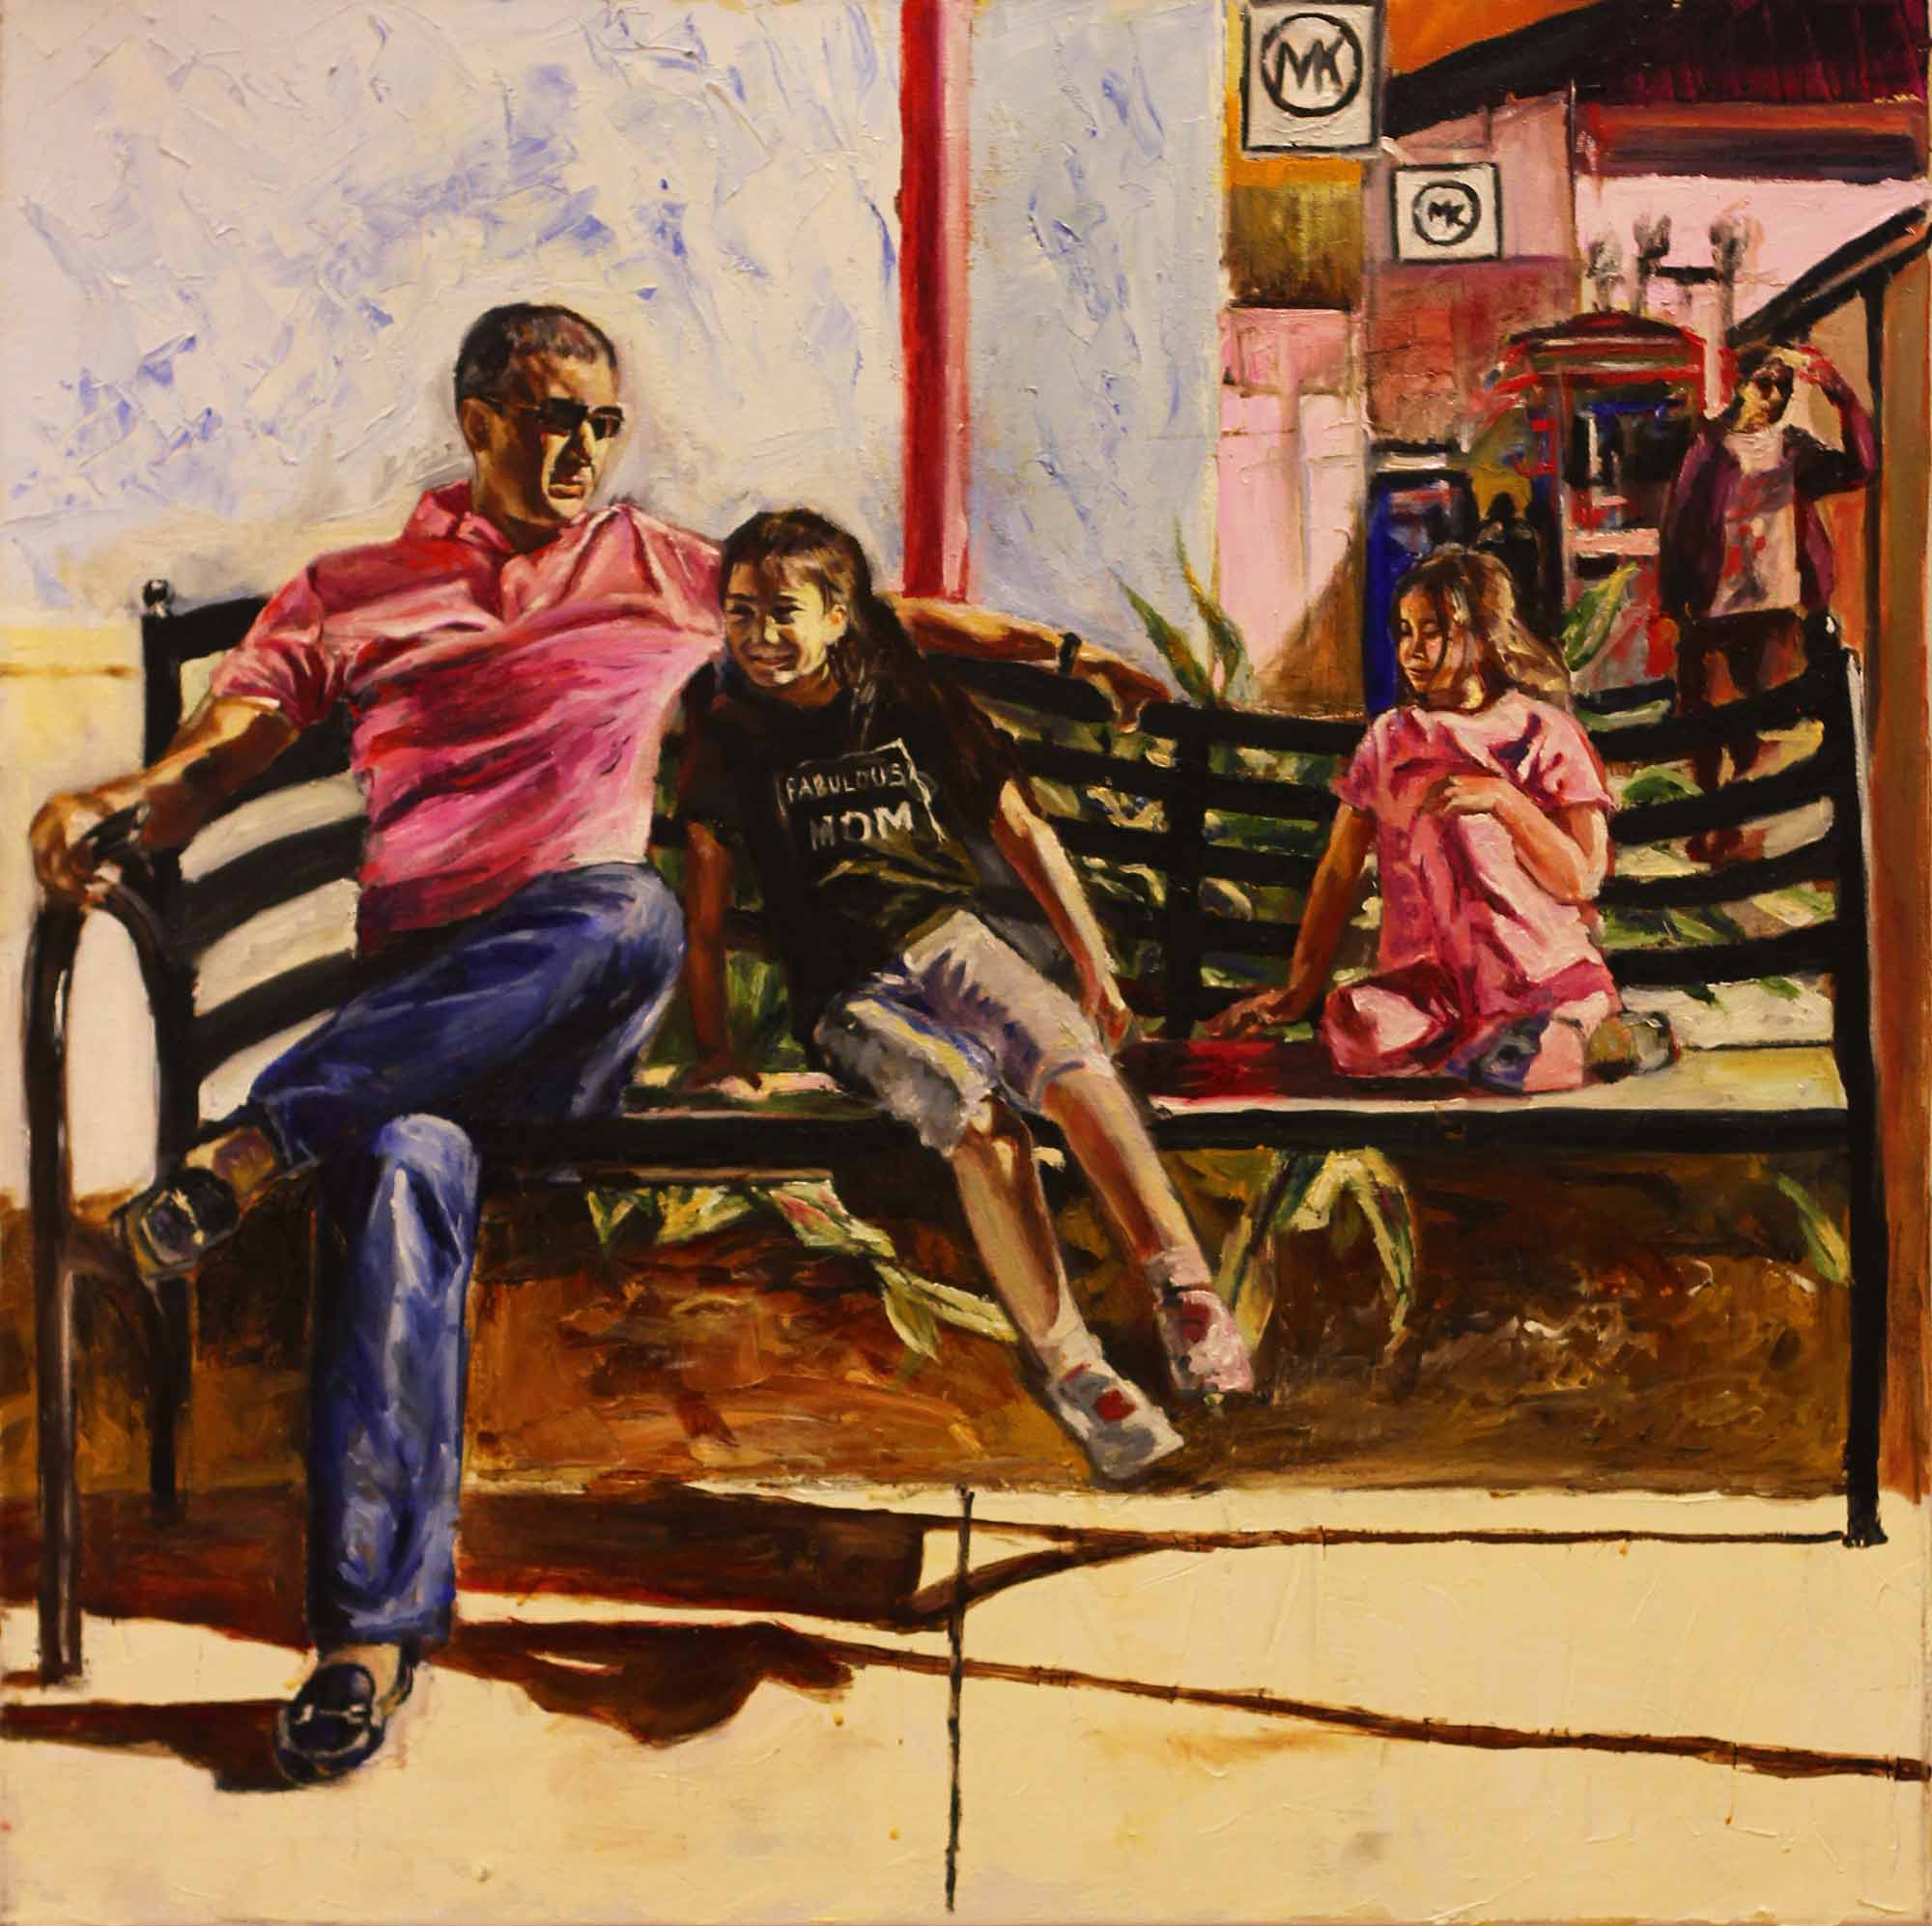 A painting of a man sitting on a bench with two children